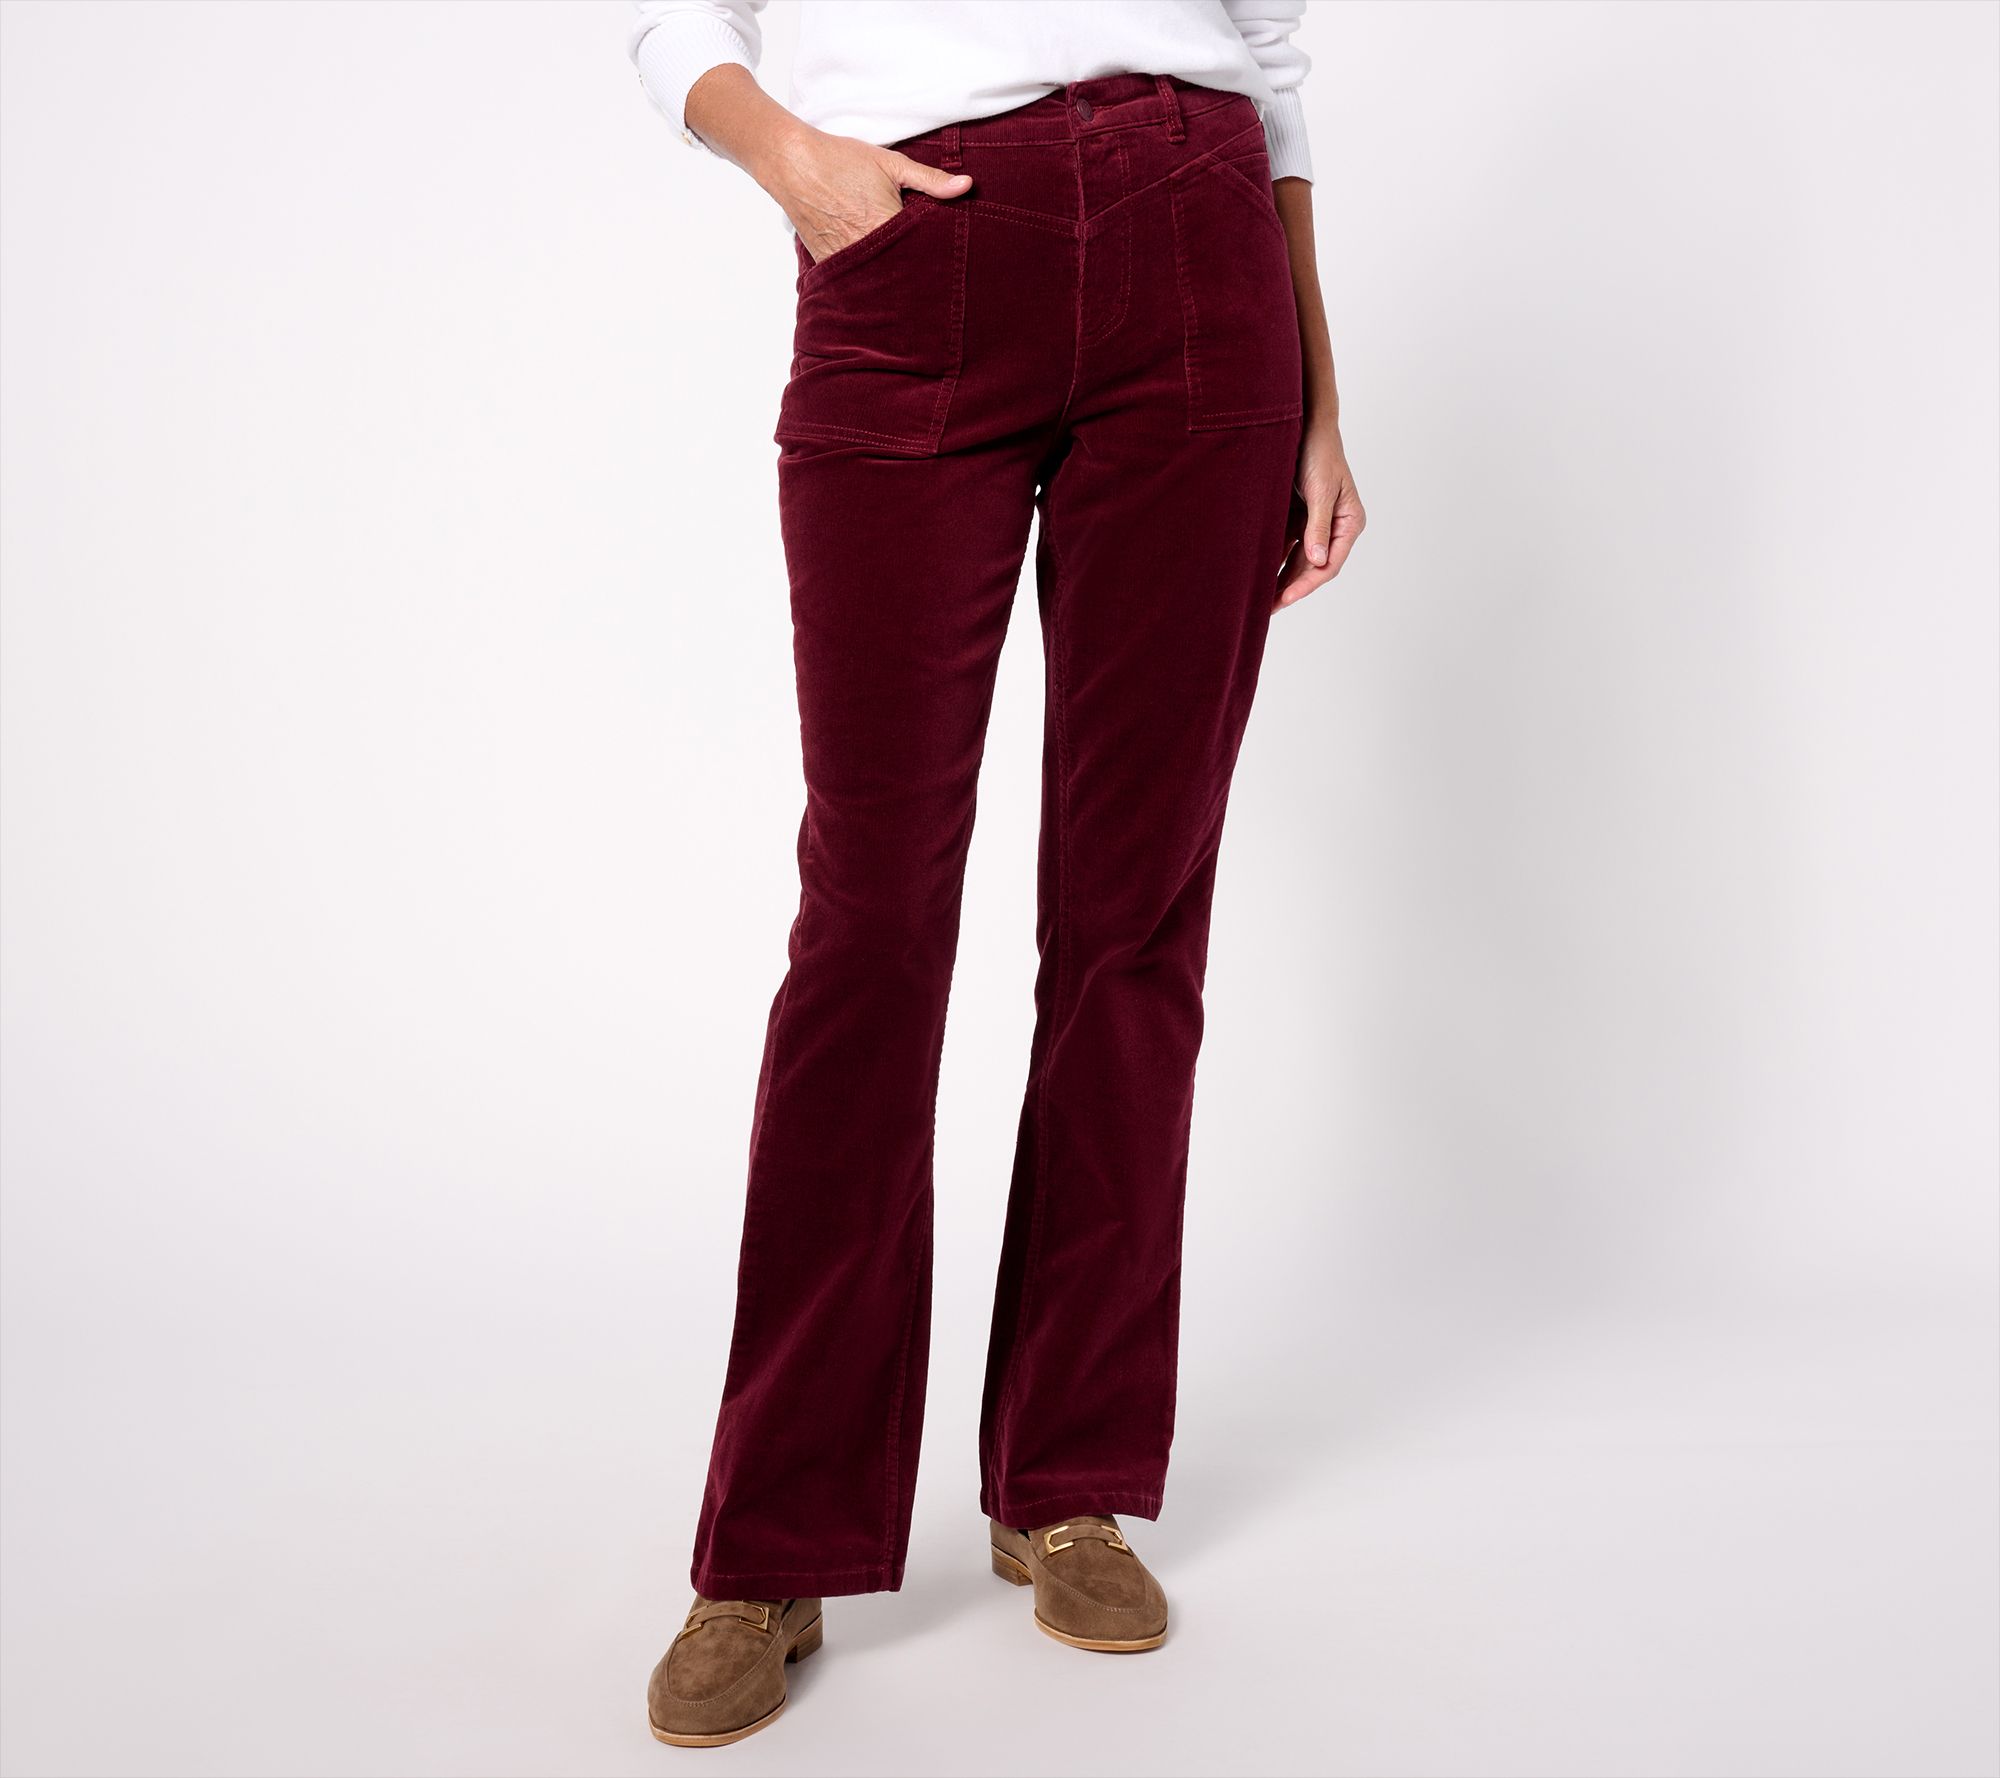 Styling Velvet Pants This Fall - The Style Contour